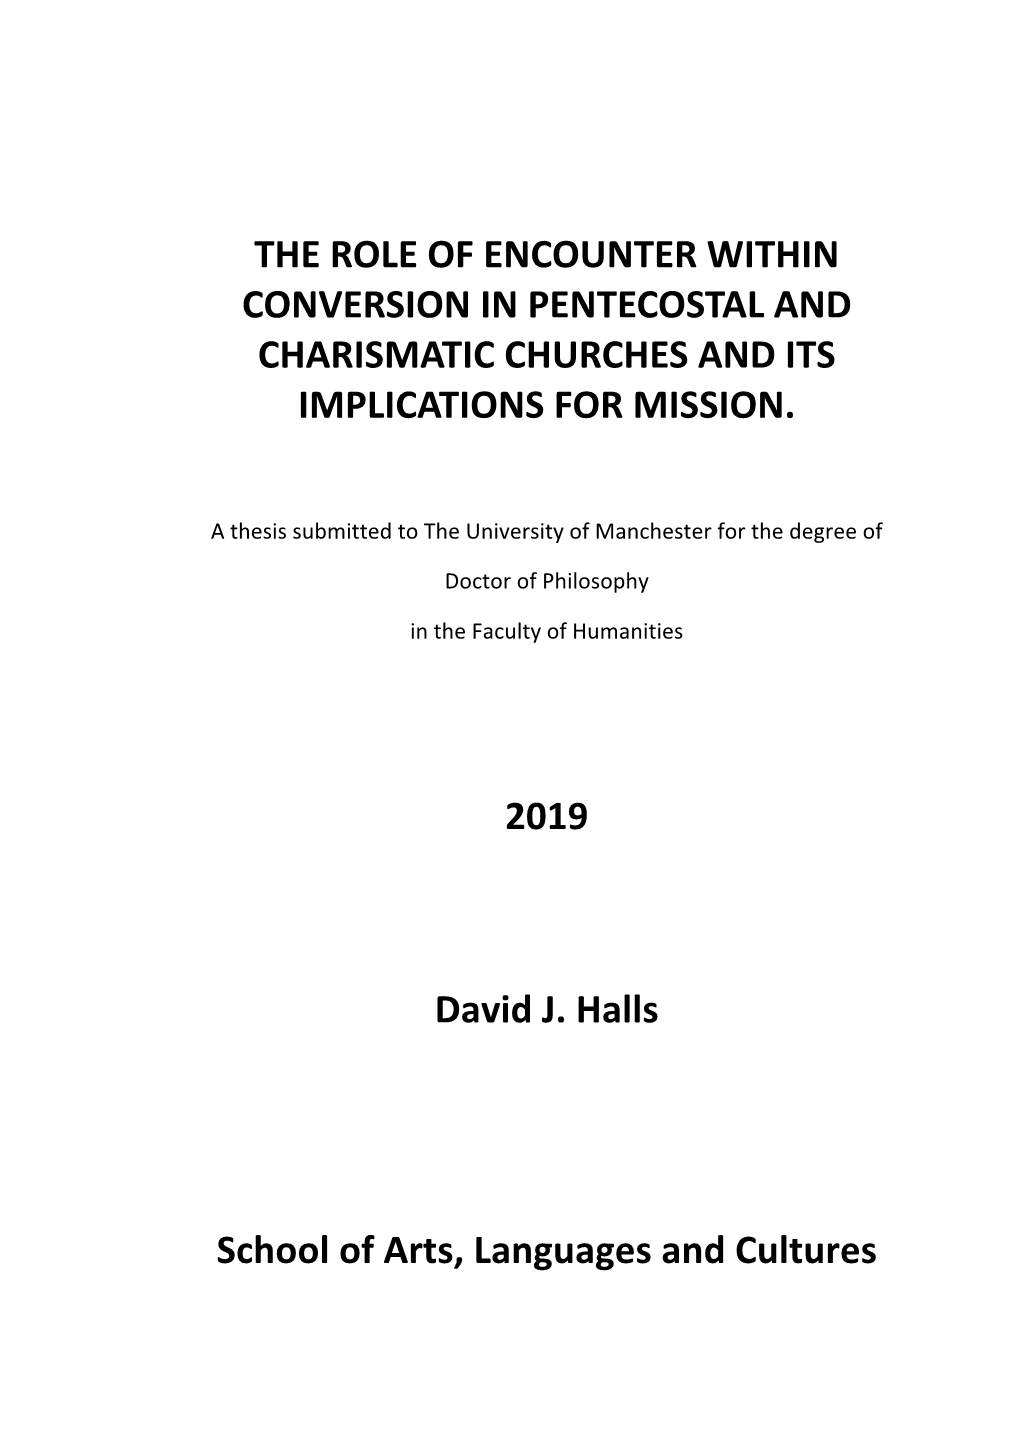 The Role of Encounter Within Conversion in Pentecostal and Charismatic Churches and Its Implications for Mission